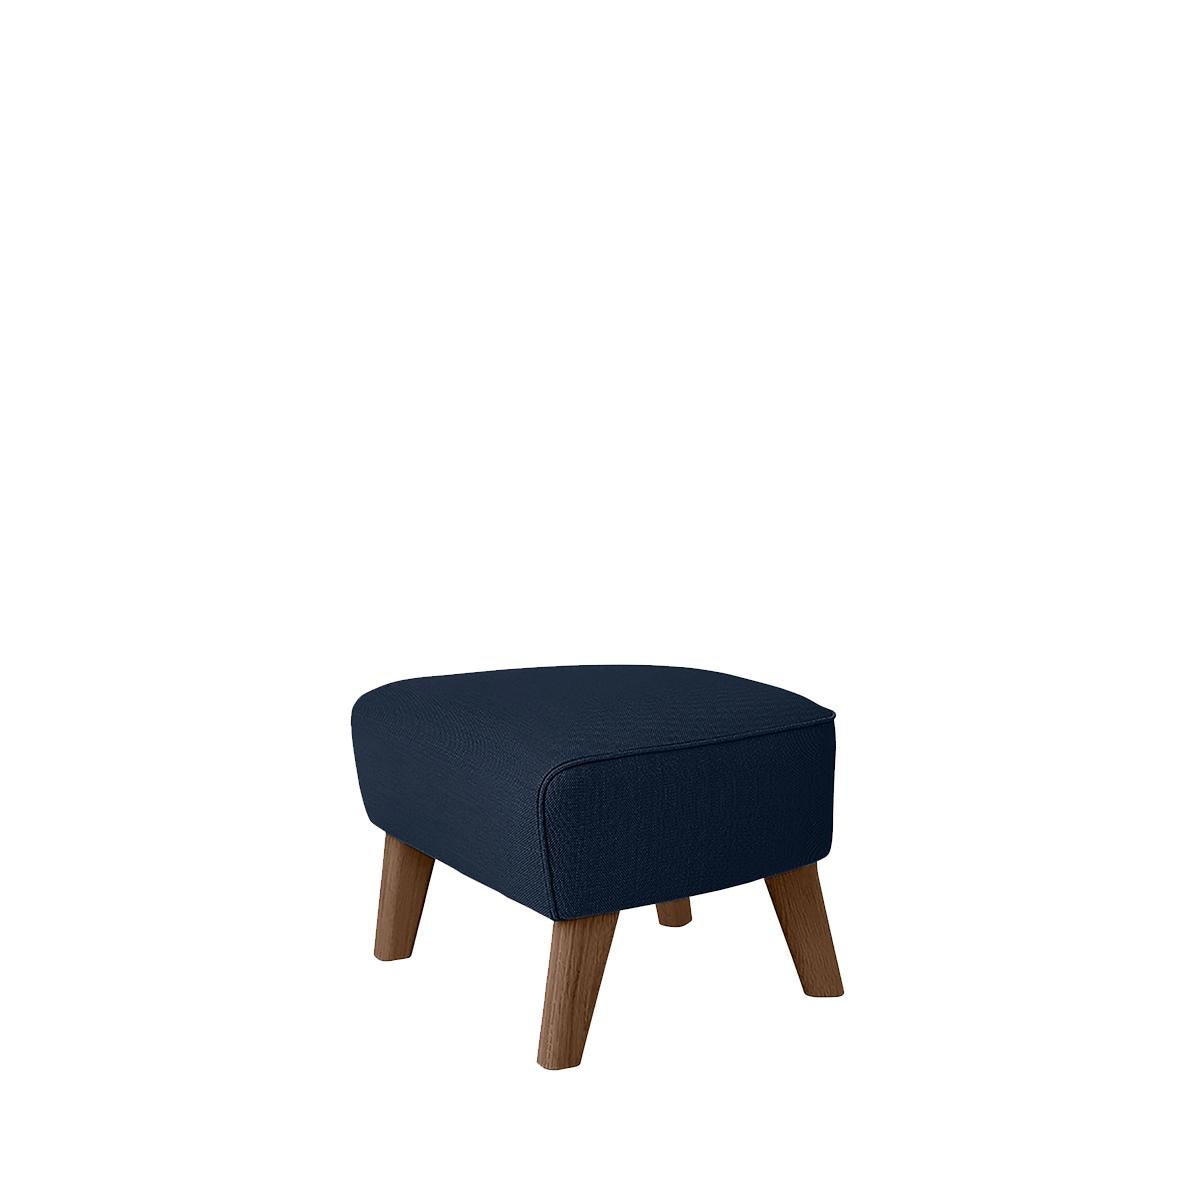 Blue and smoked oak sahco zero footstool by Lassen
Dimensions: W 56 x D 58 x H 40 cm 
Materials: Textile
Also available: other colors available

The my own chair Footstool has been designed in the same spirit as Flemming Lassen’s original